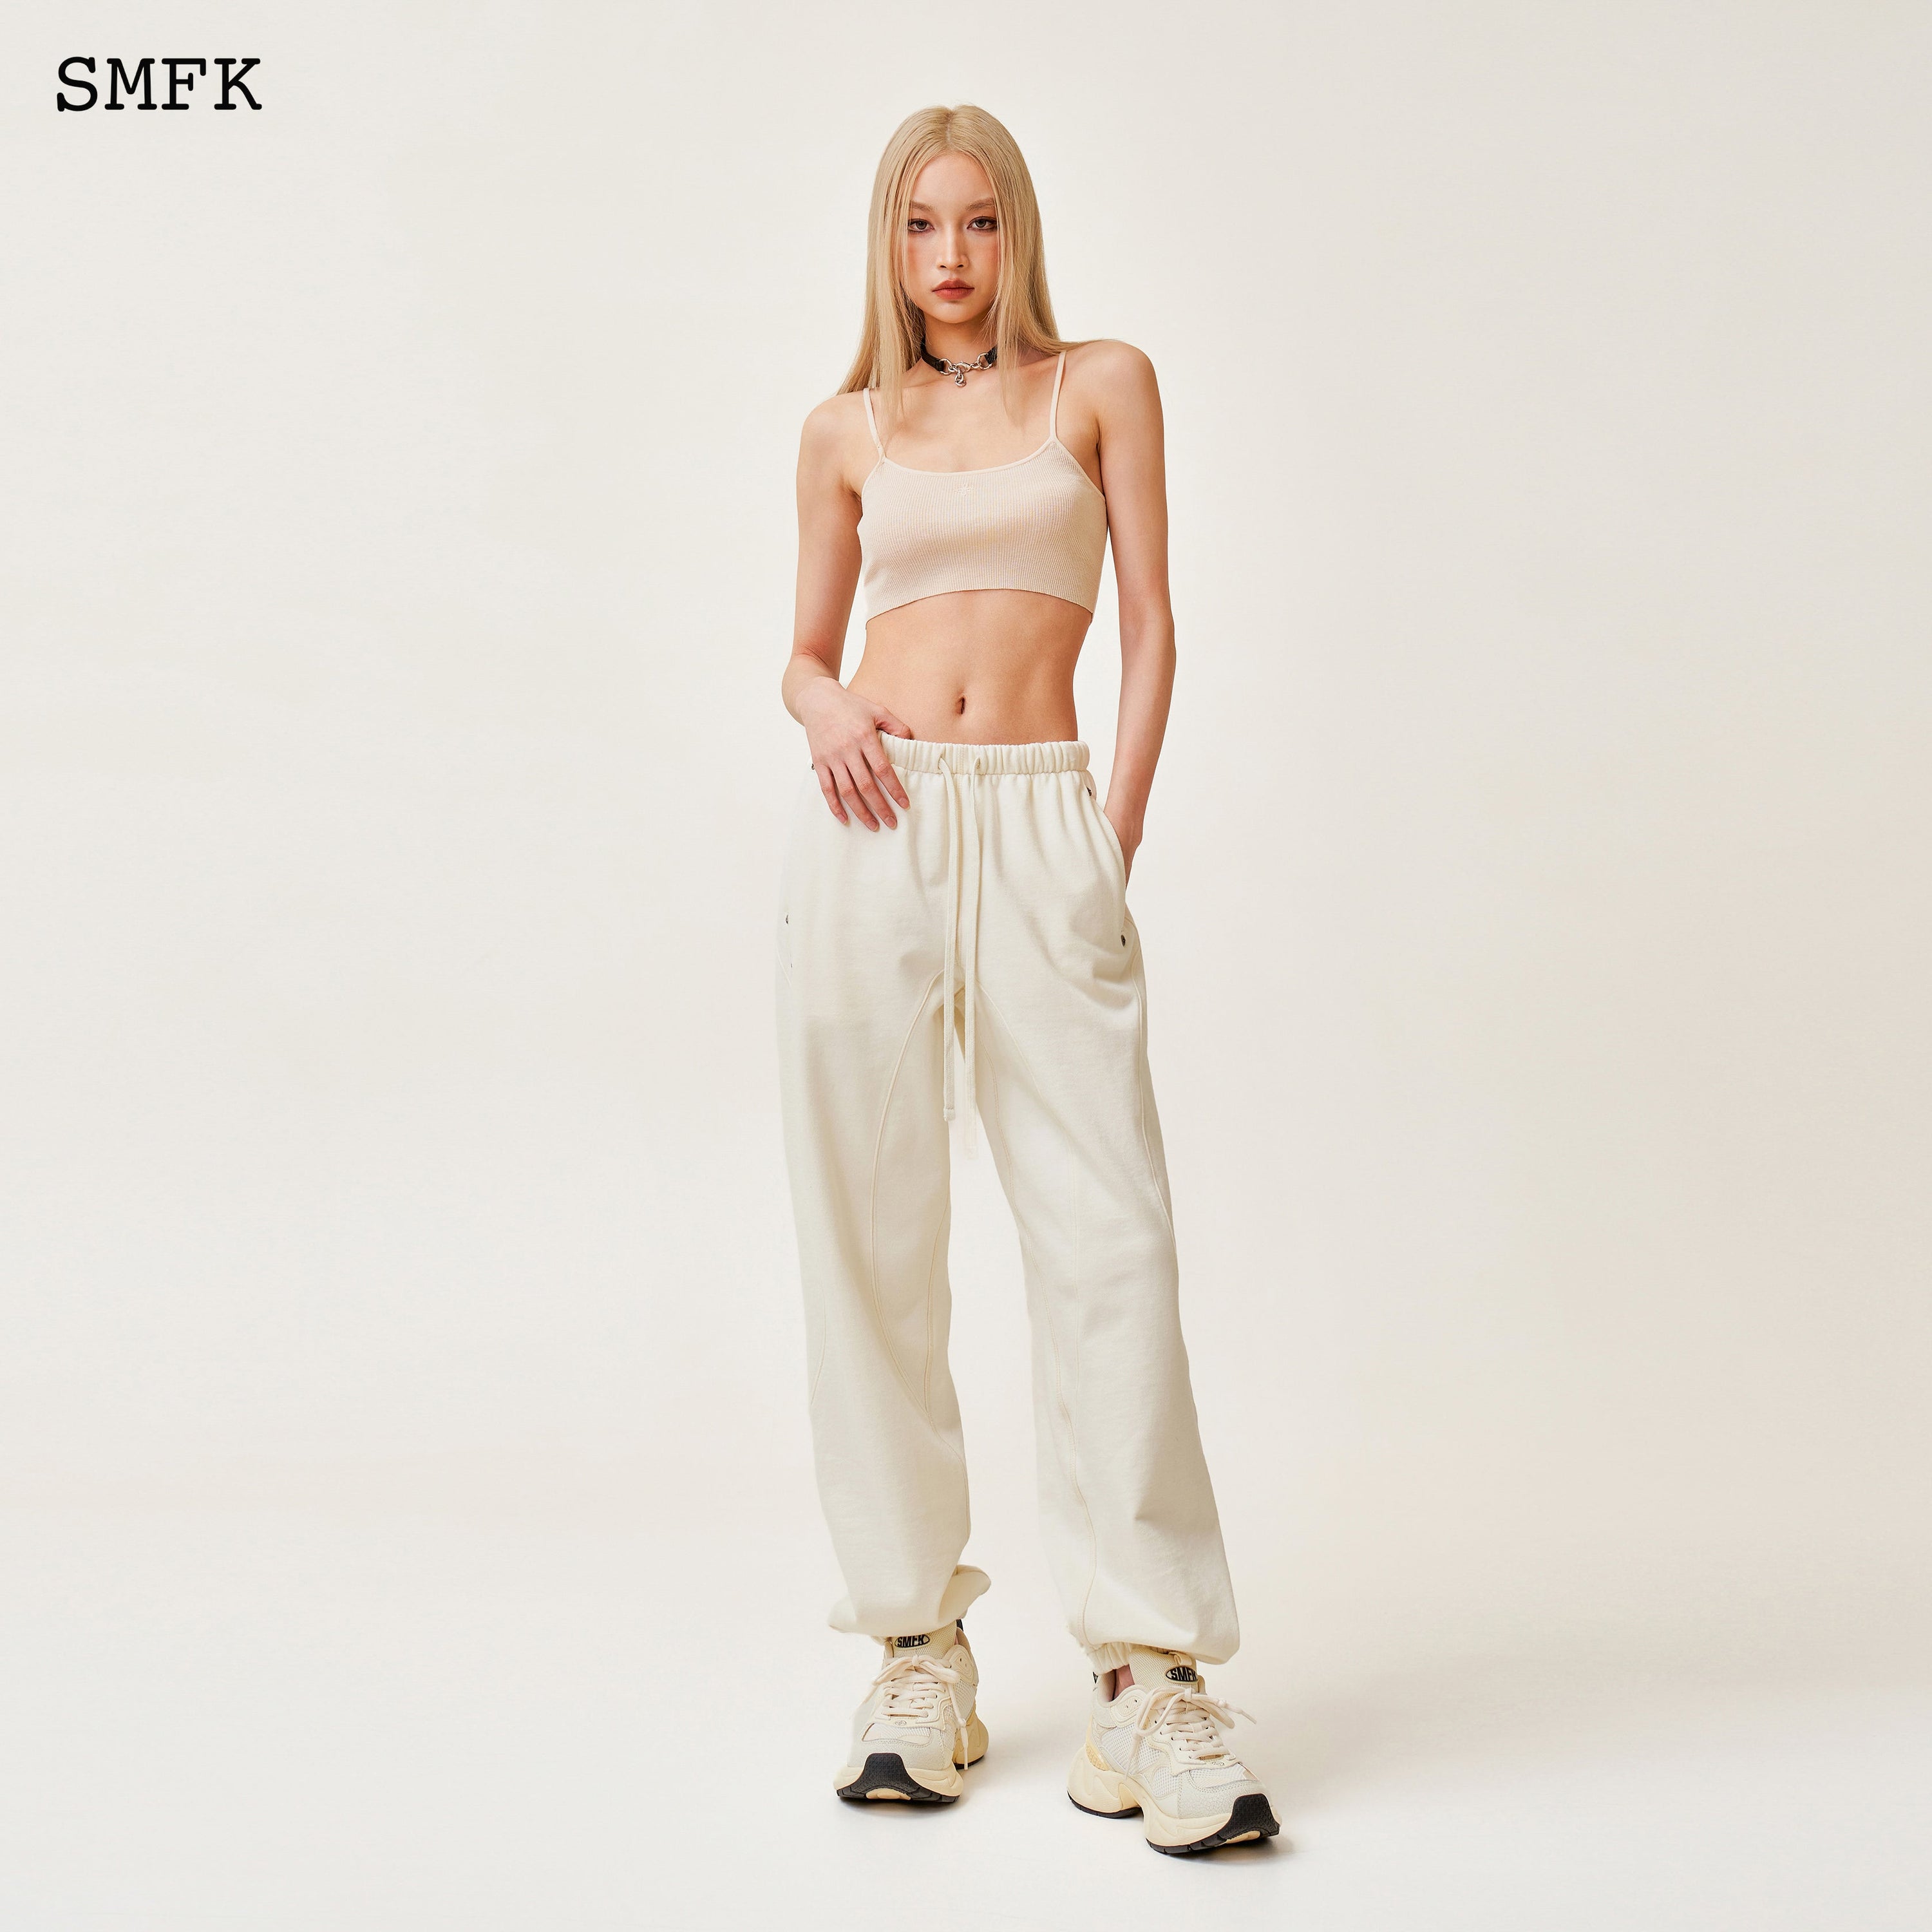 Compass Rush Jogging sweatpants In White - SMFK Official